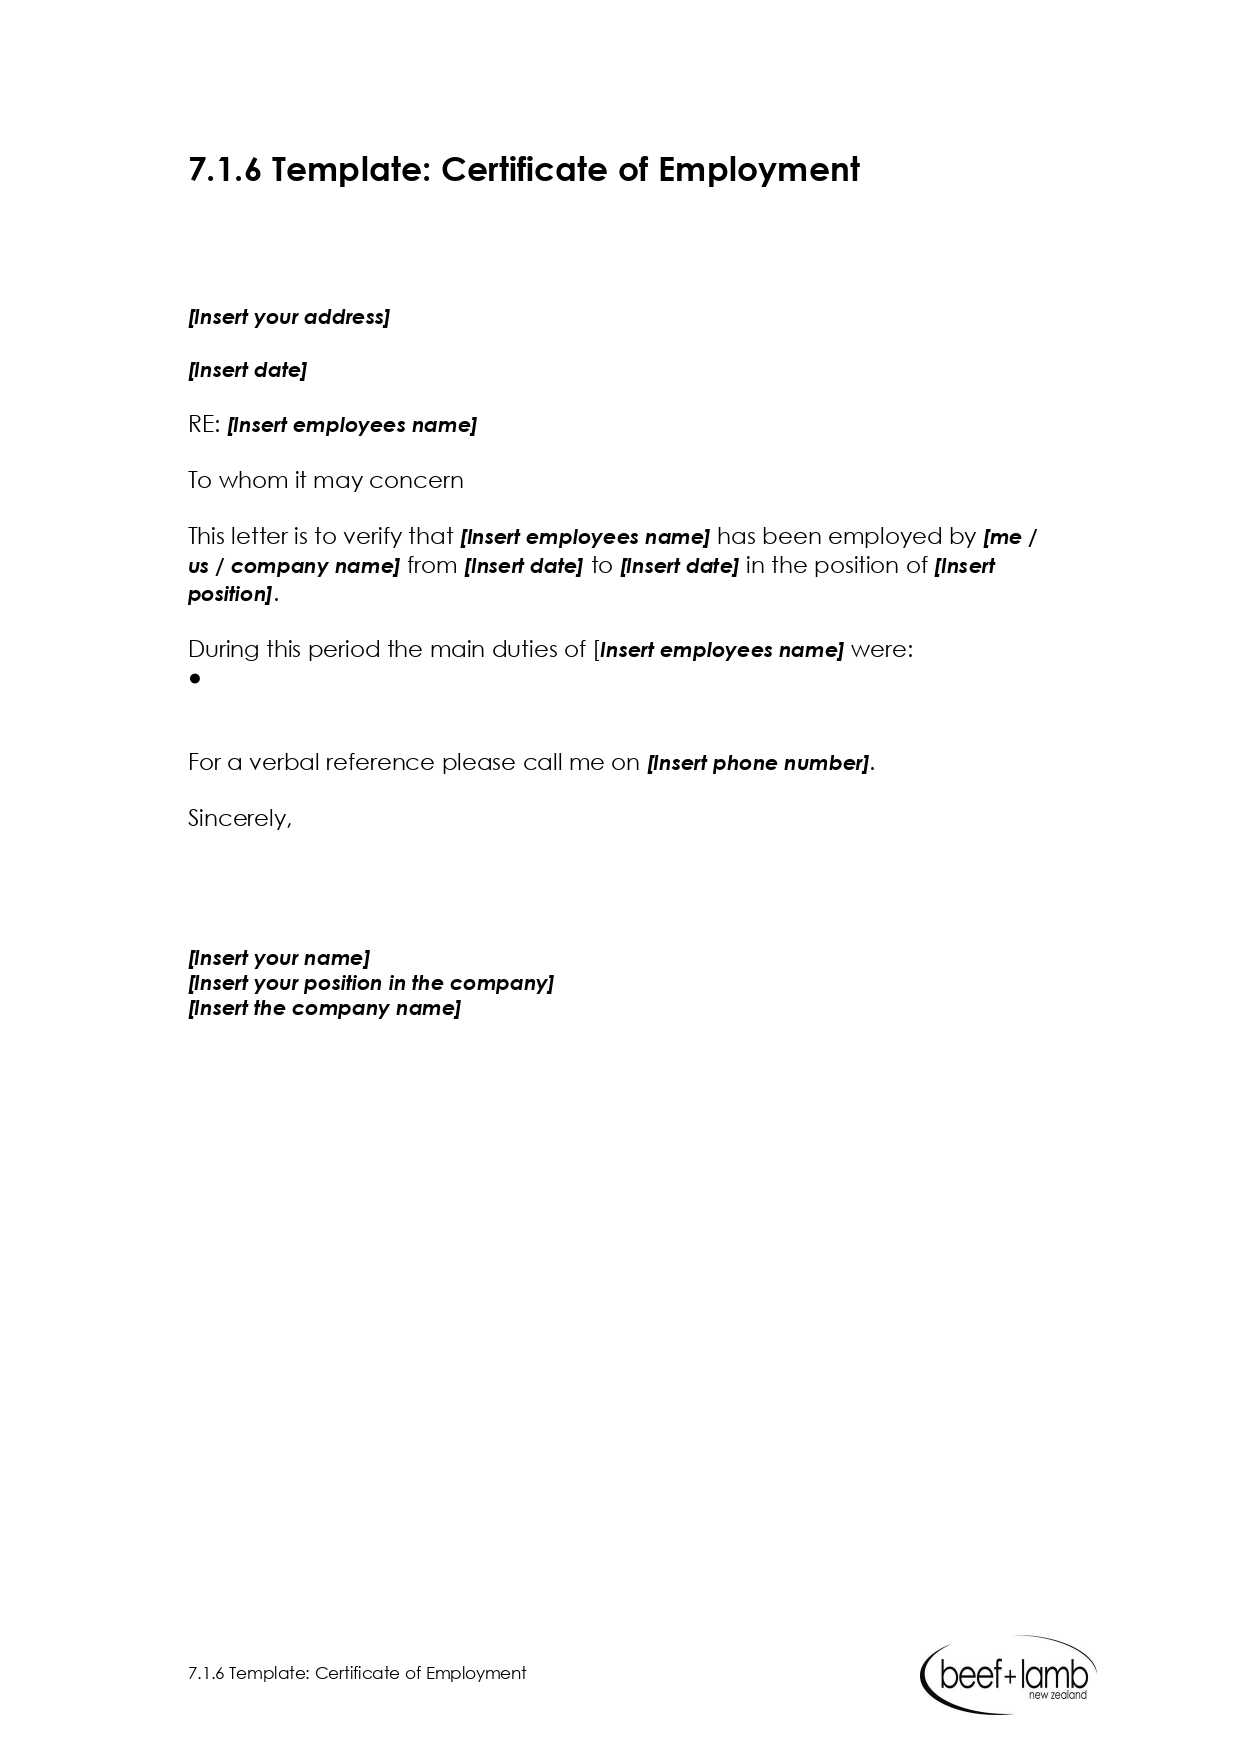 Editable Certificate Of Employment Template – Google Docs Intended For Template Of Certificate Of Employment